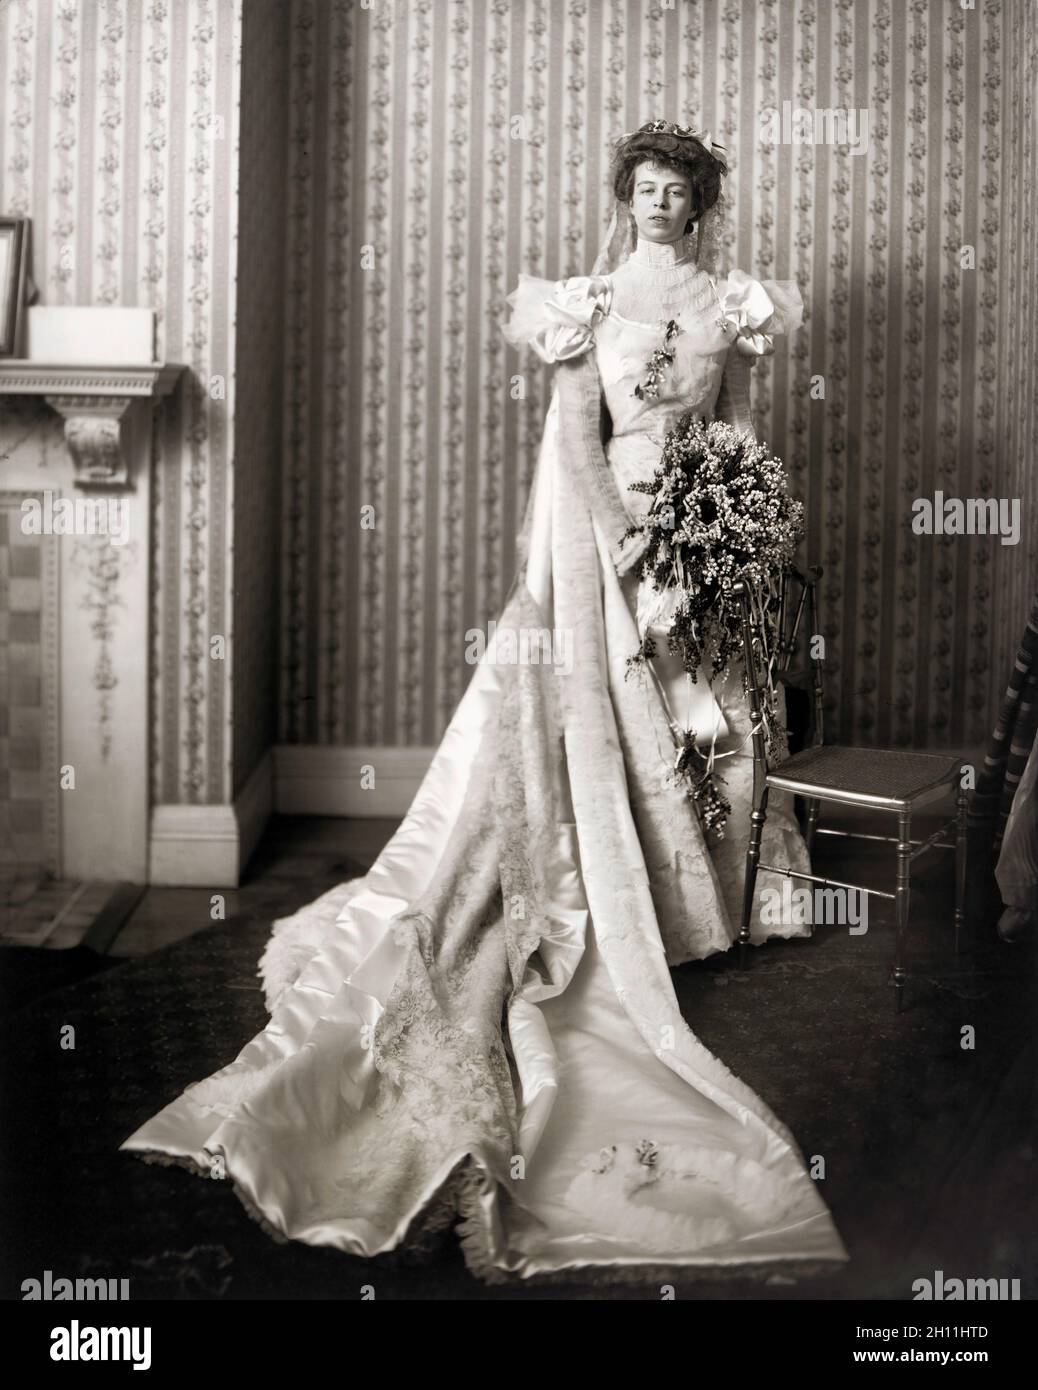 Eleanor Roosevelt on her Wedding Day, full-length Portrait, New York City, New York, USA, Pach Brothers Studio, March 17, 1905 Stock Photo